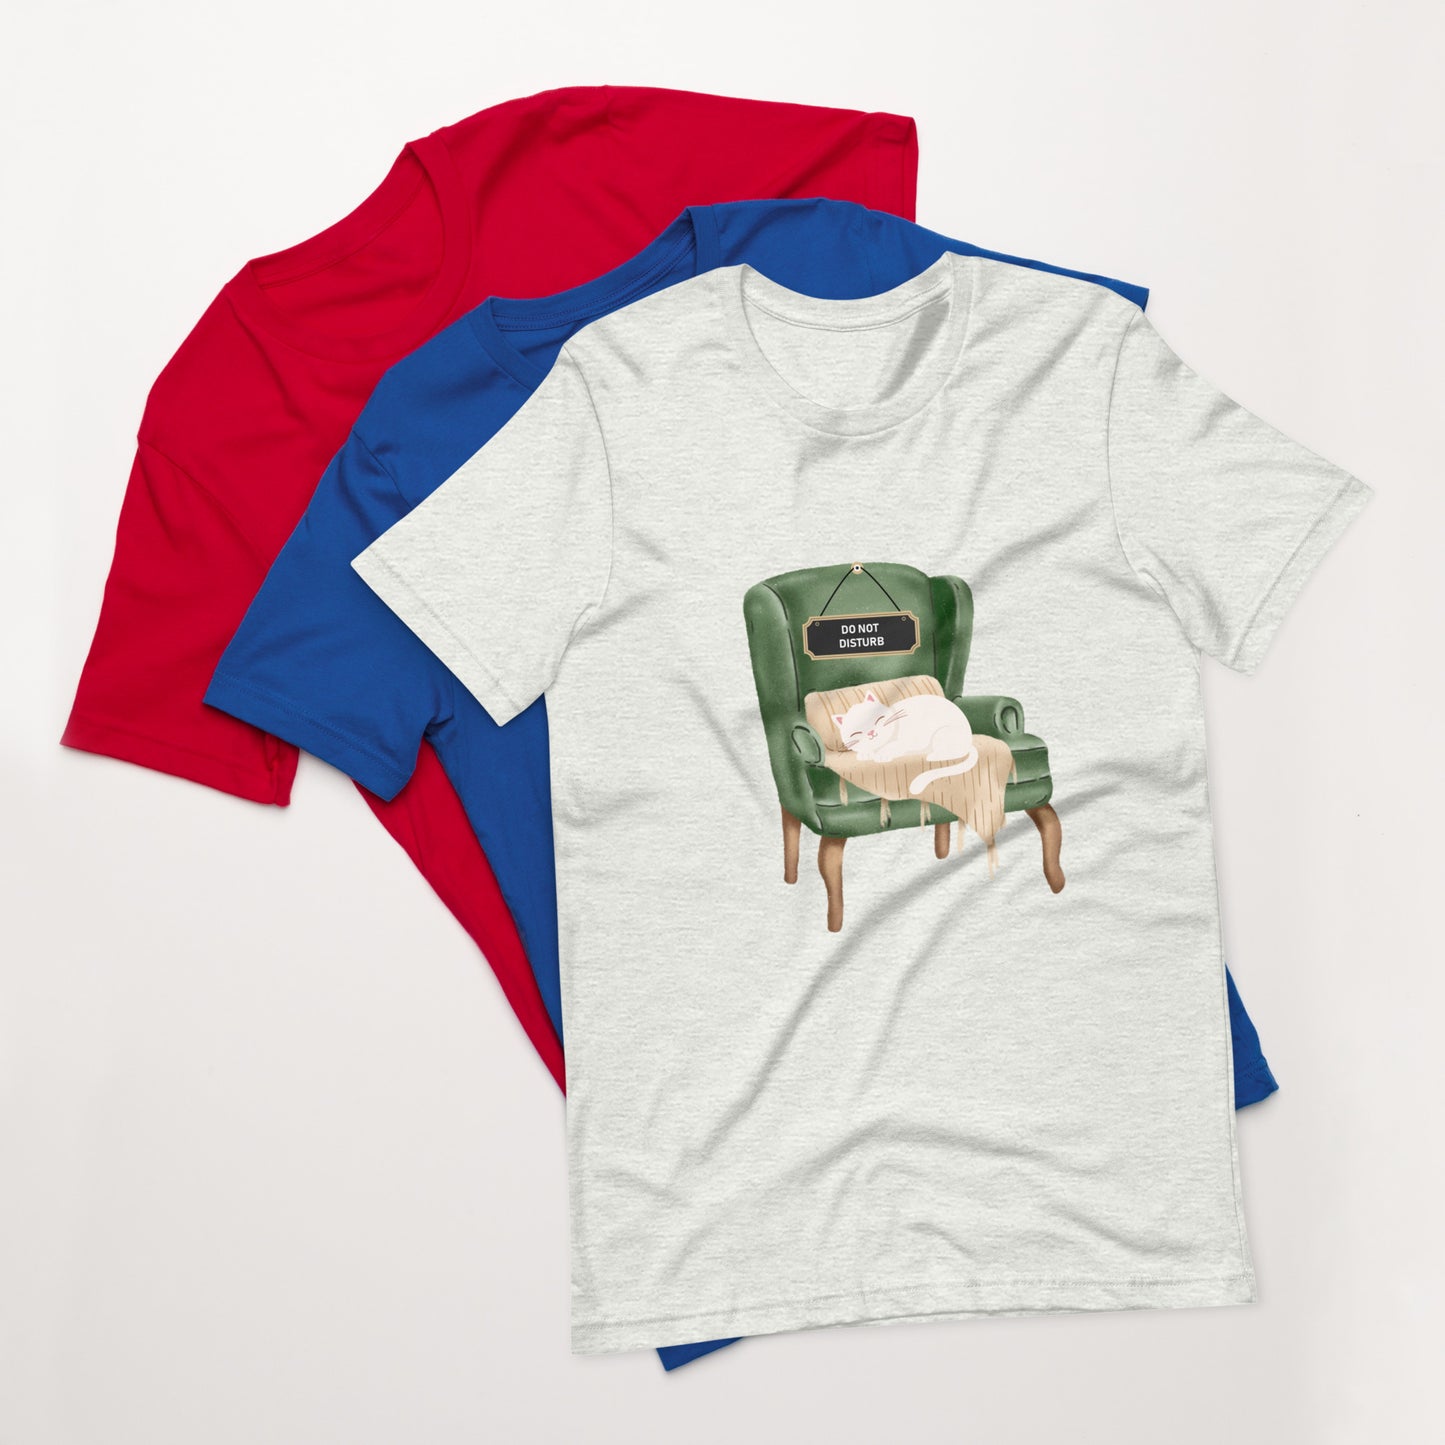 Cat, Funny, Sleeping, Dozing Off, Chair, Living Room, Unisex, Happy, Dreaming, Animal, T-shirt